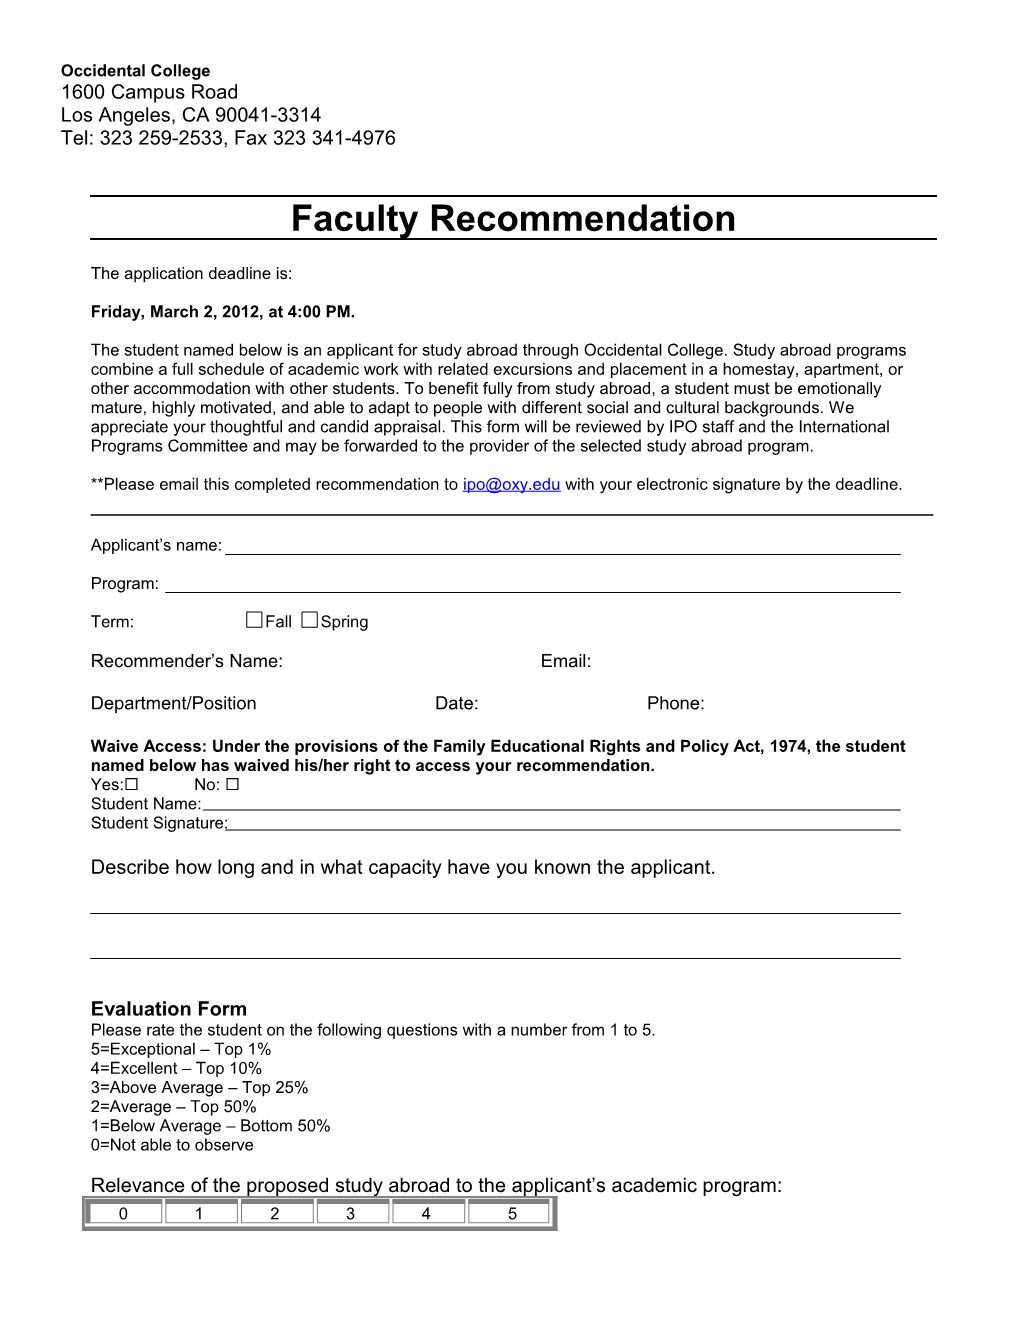 Faculty Recommendation 1 Part I